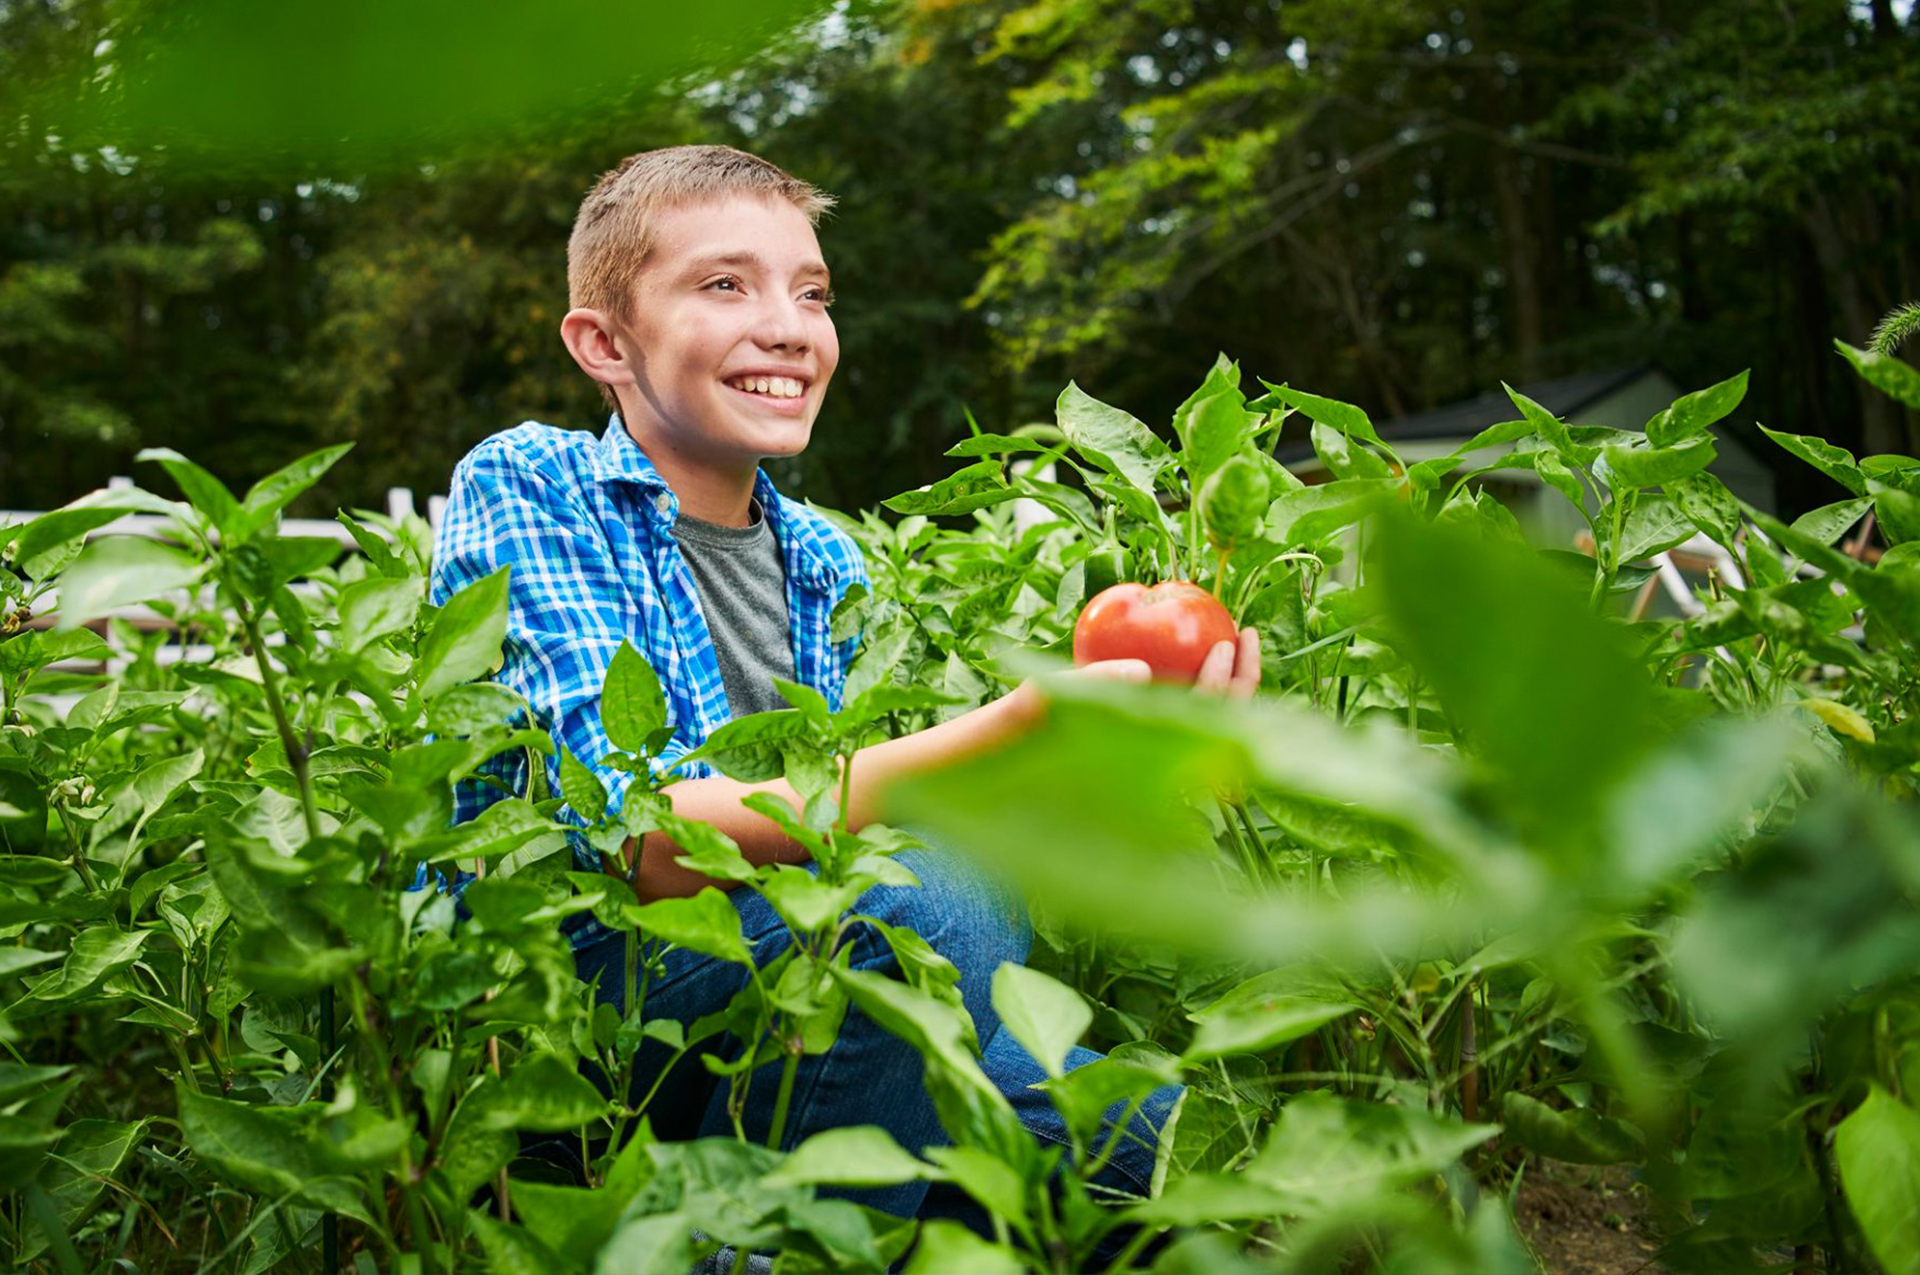 Jakob holding a tomato in his garden